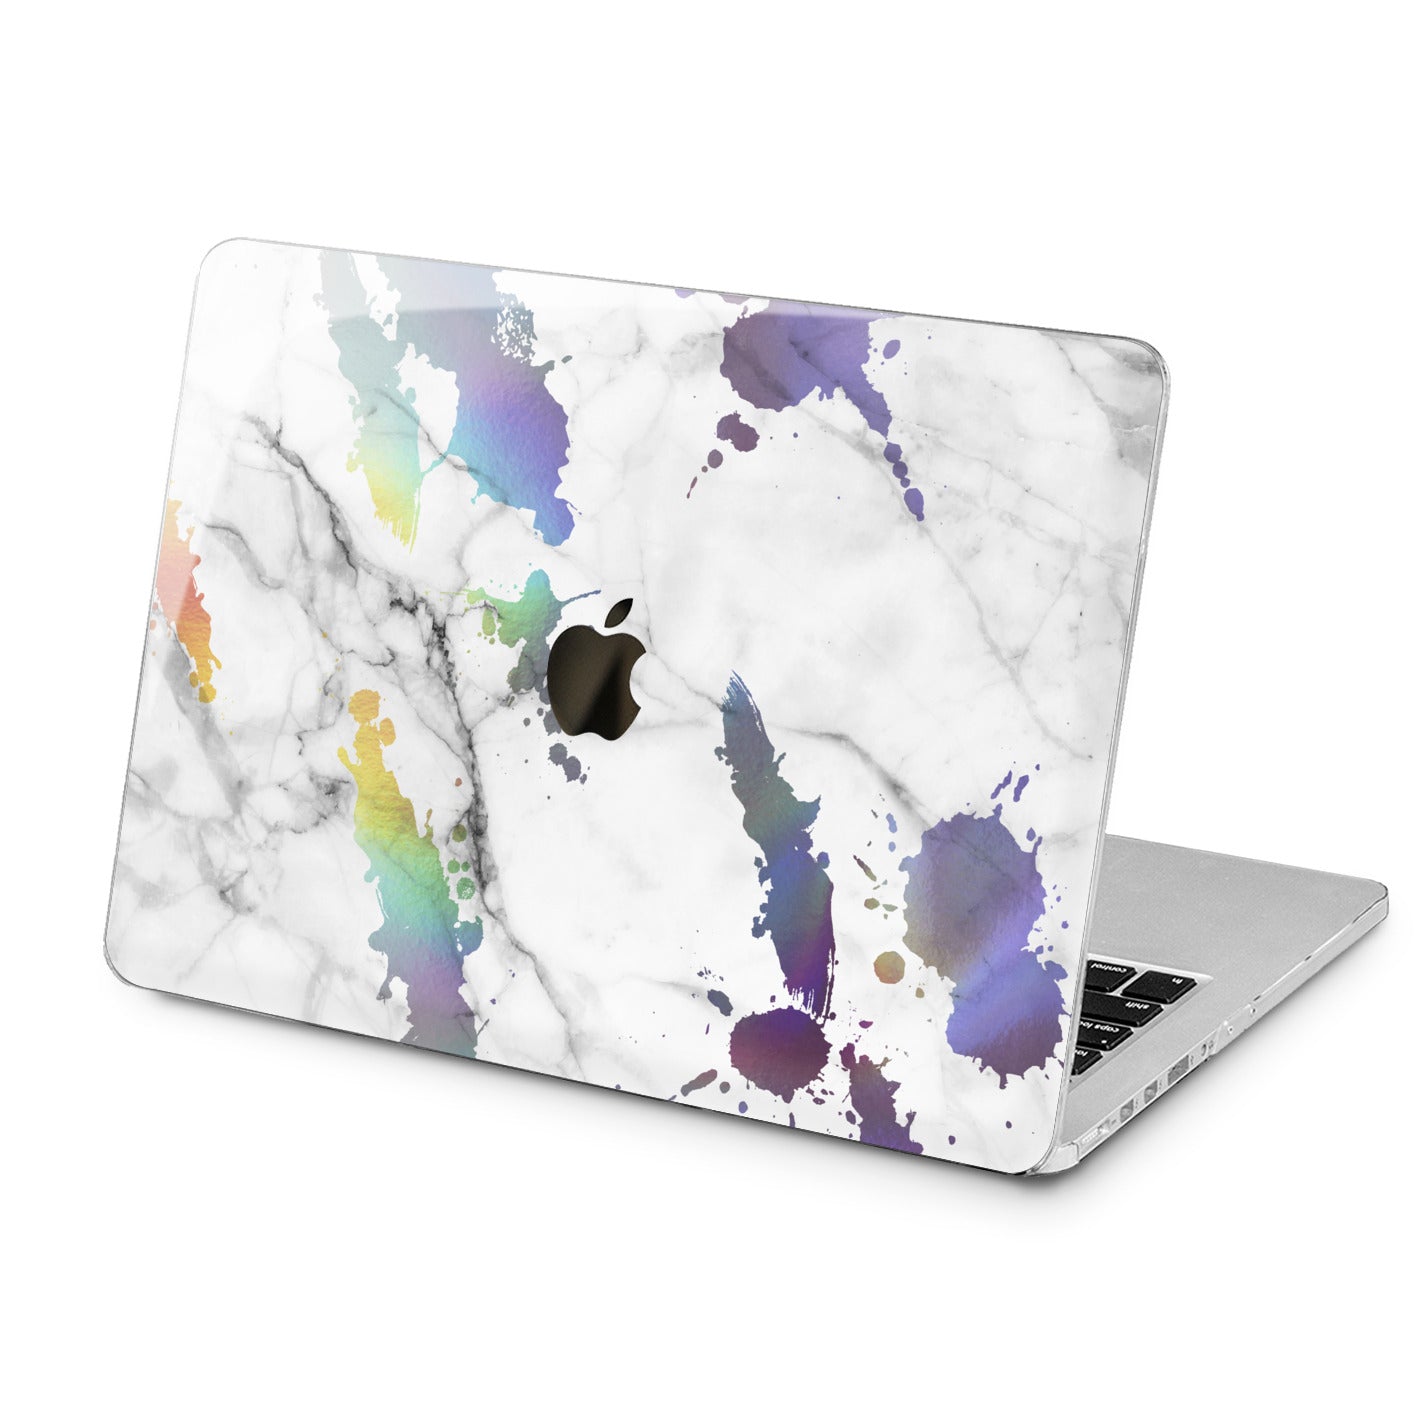 Lex Altern Clear Case For Apple Macbook Air 13 Mac Pro 15 Inch Retina 12 11 19 18 17 16 Women Floral Artistic Design Flowers Print Bright Cover Blue Petals Laptop Plastic Touch Bar Hard Shell Cases Office Products